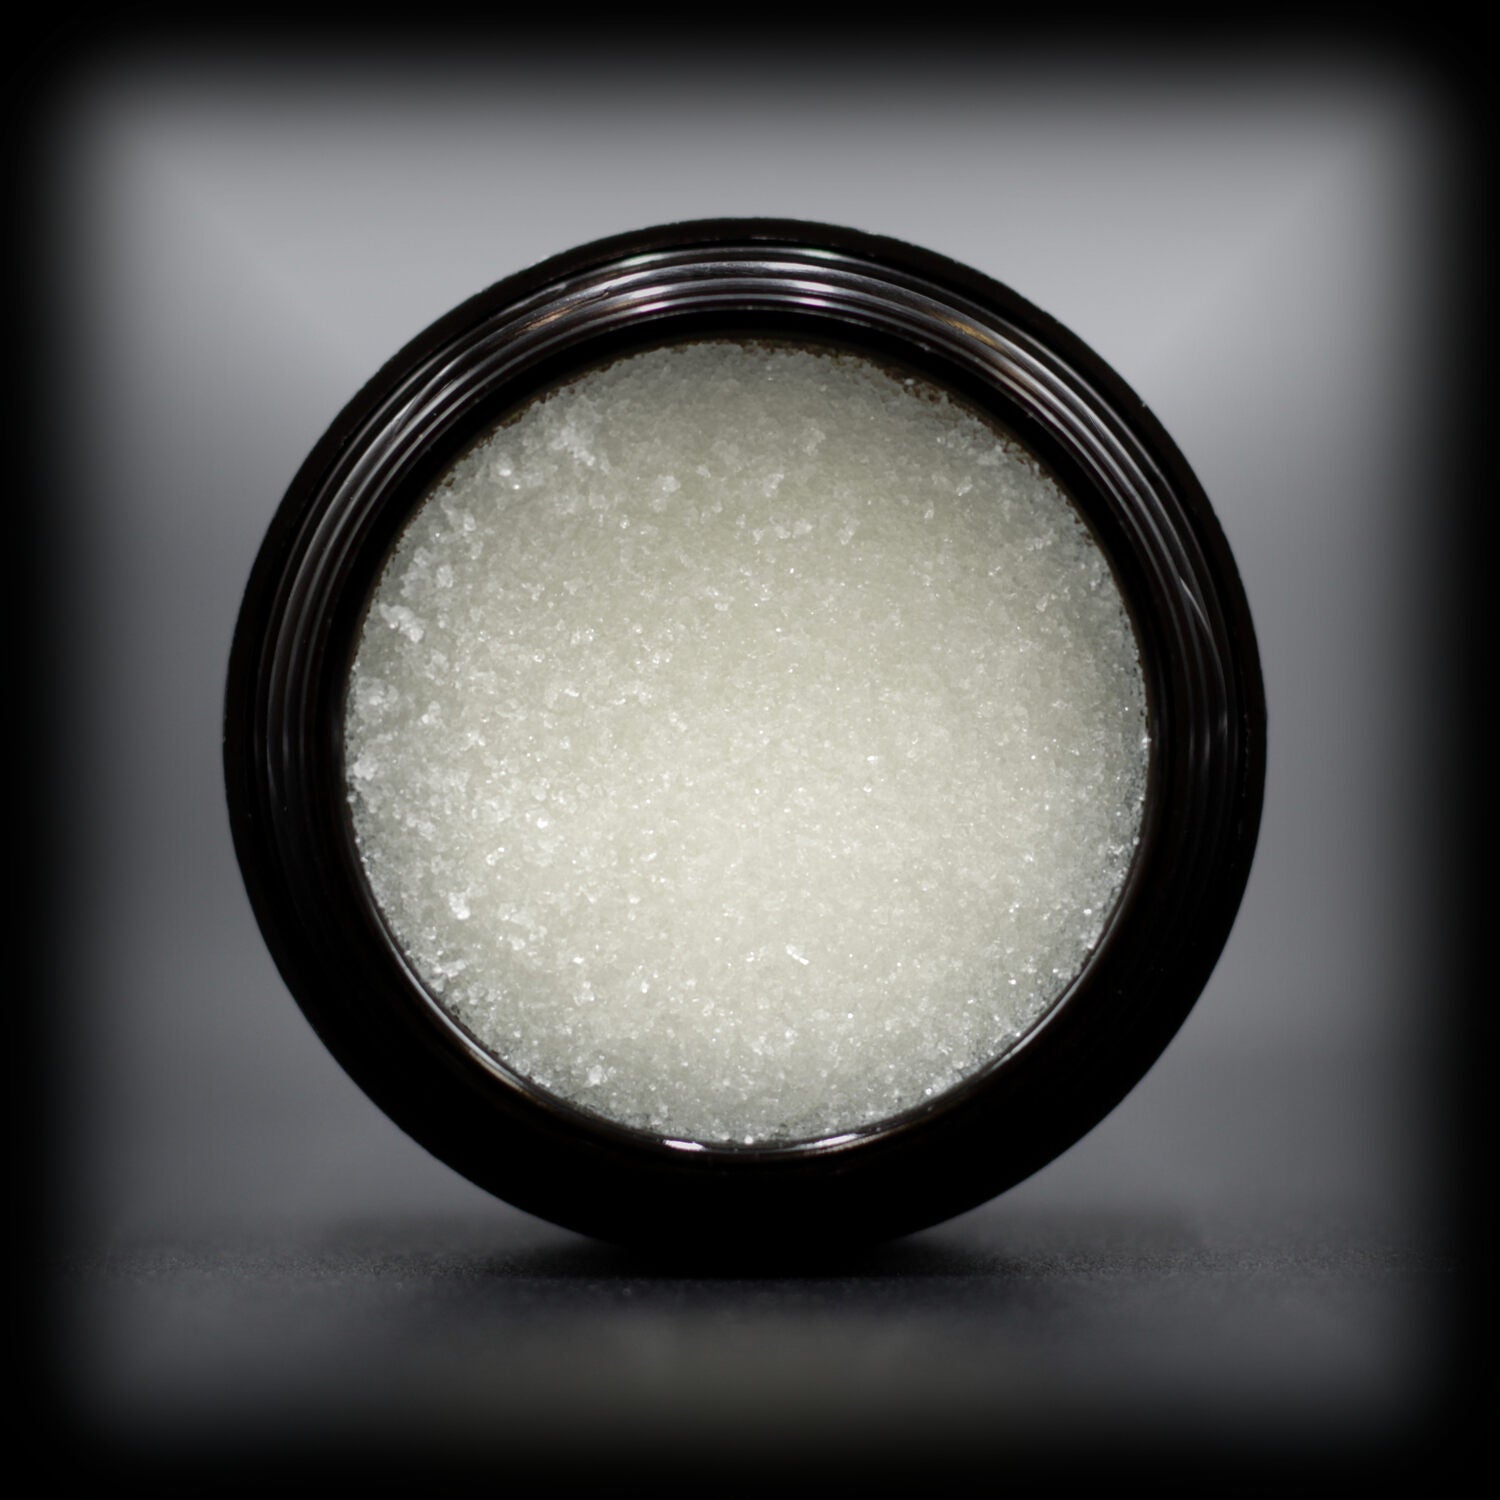 Naturally Wicked Exfoliating Sugar Peppermint Lip Scrub Visible With Lid Removed & Sugar Crystals Exposed